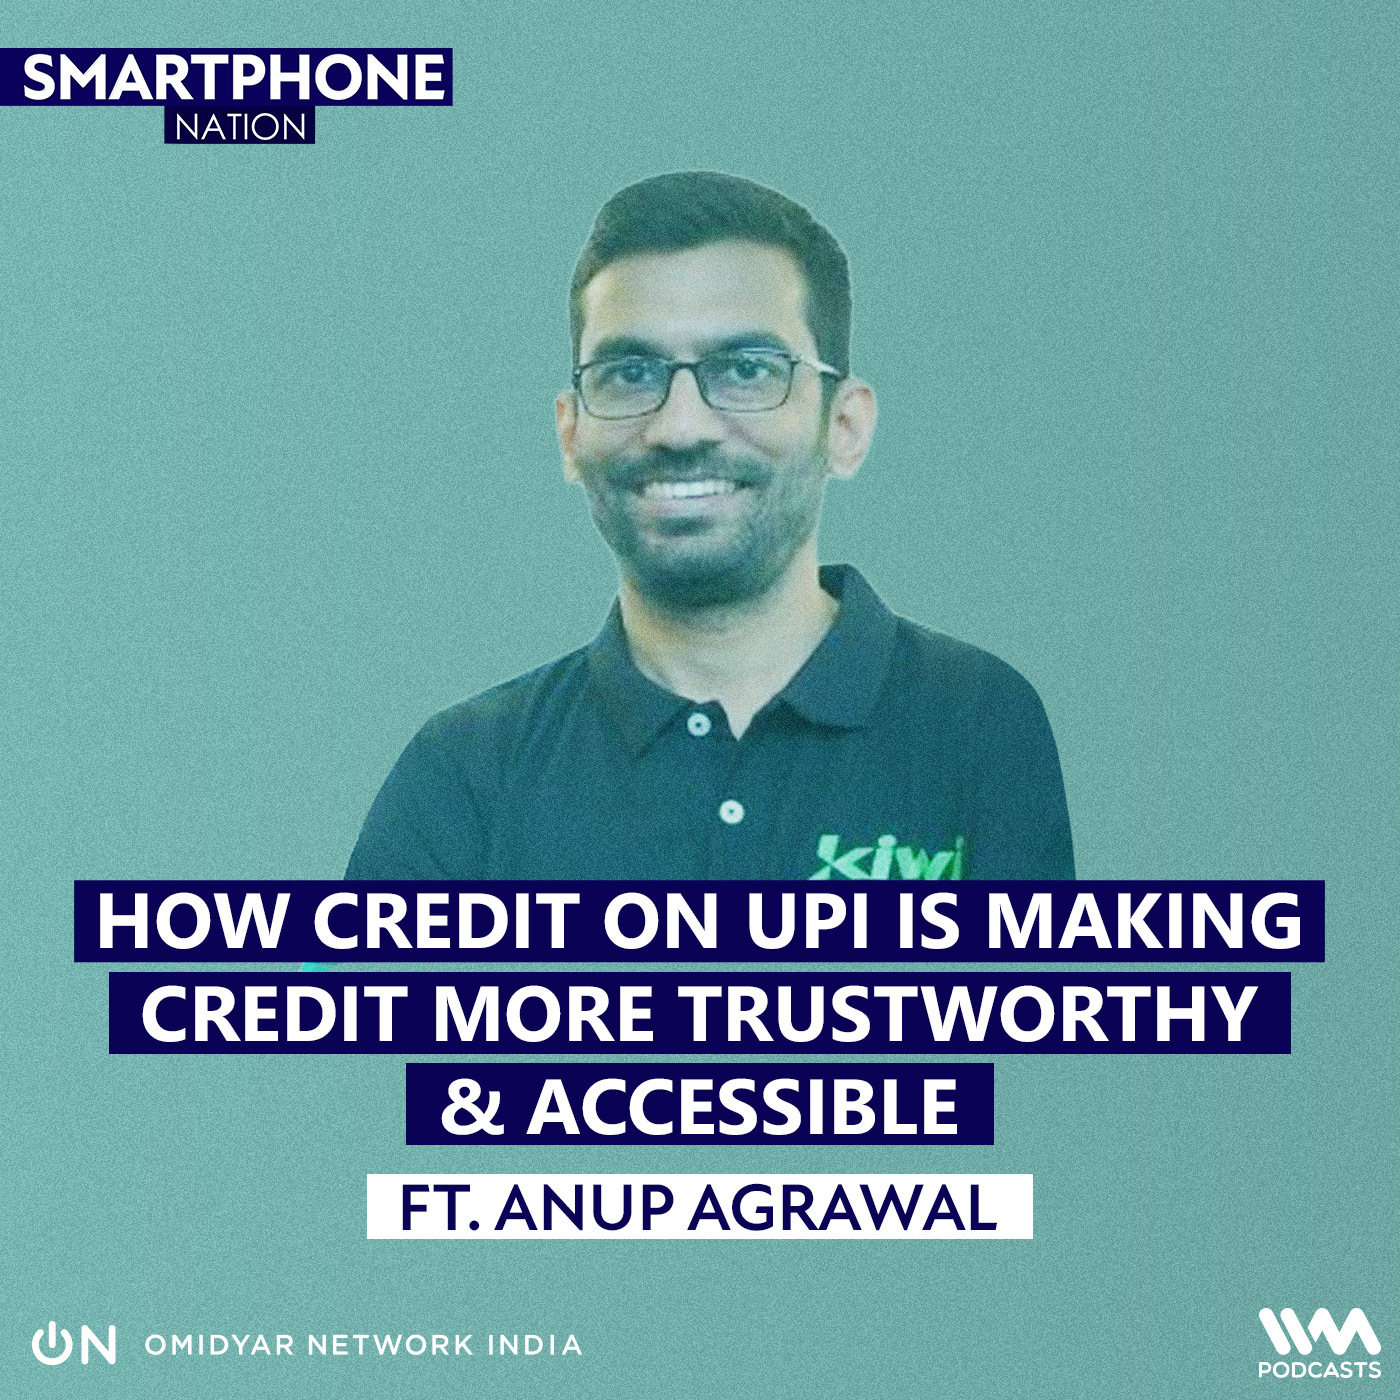 How Credit on UPI is making Credit more Trustworthy and Accessible Ft. Anup Agrawal